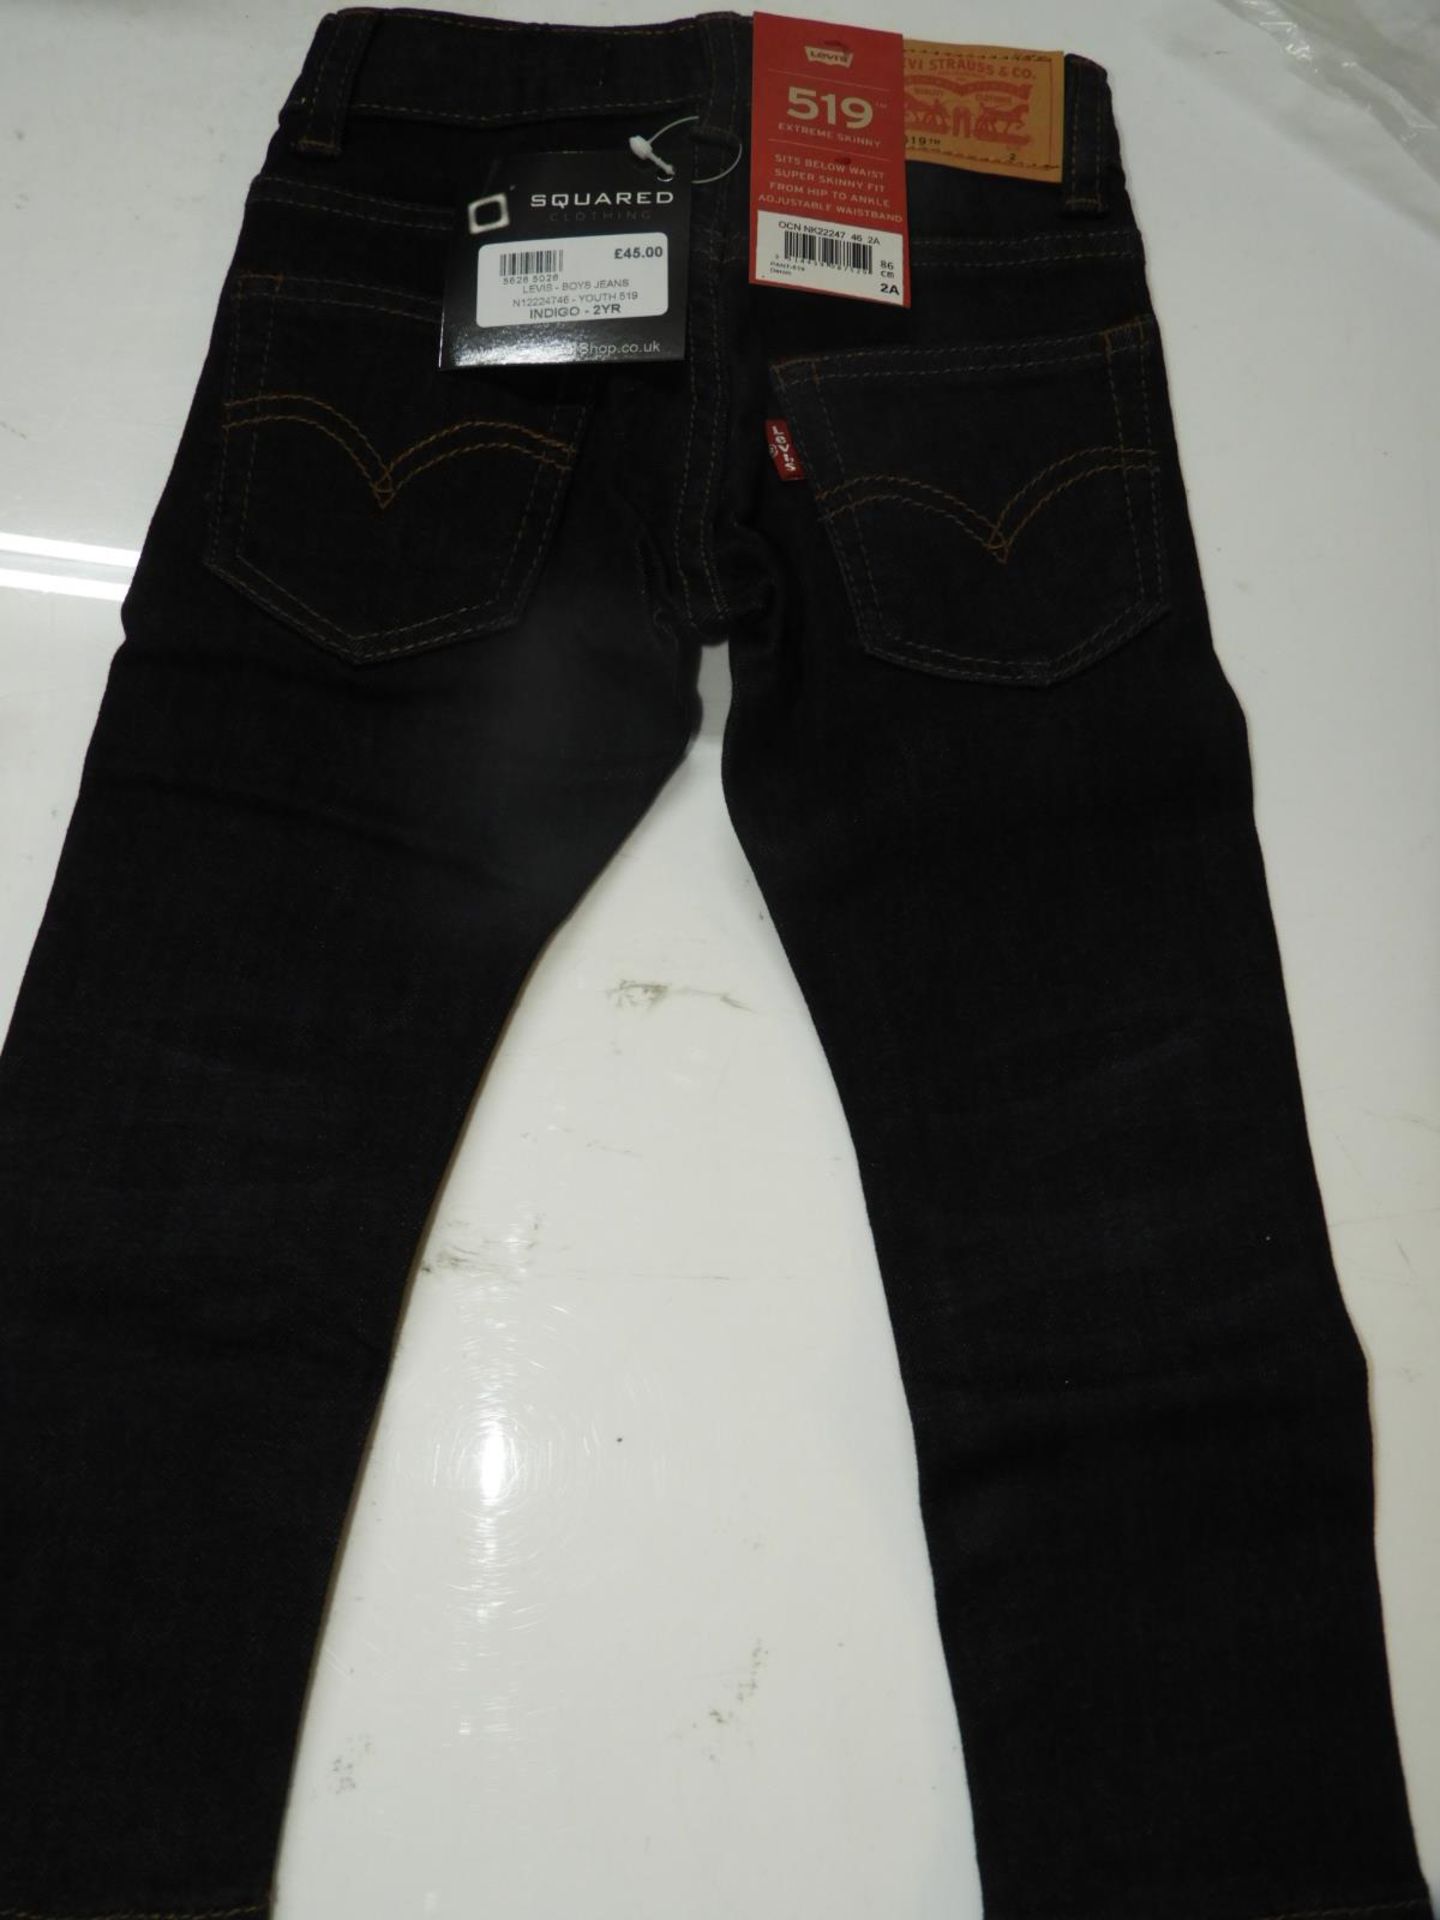 Levi 519 Children's Jeans Size: 2 Years